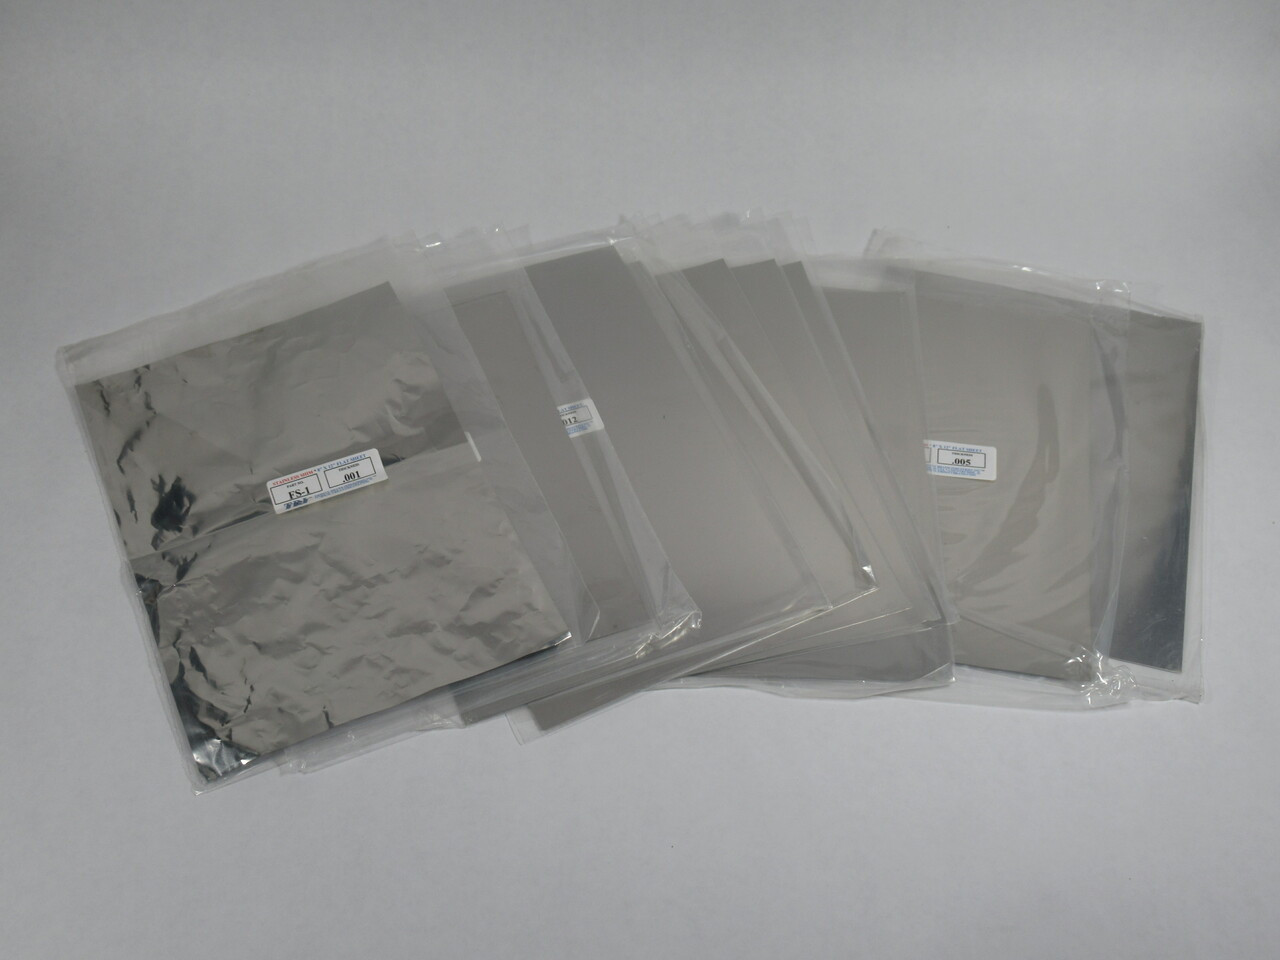 TBI FSA-10 Stainless Steel Shim 8x12" Sheets 10-PACK ASSORTED SIZES NEW